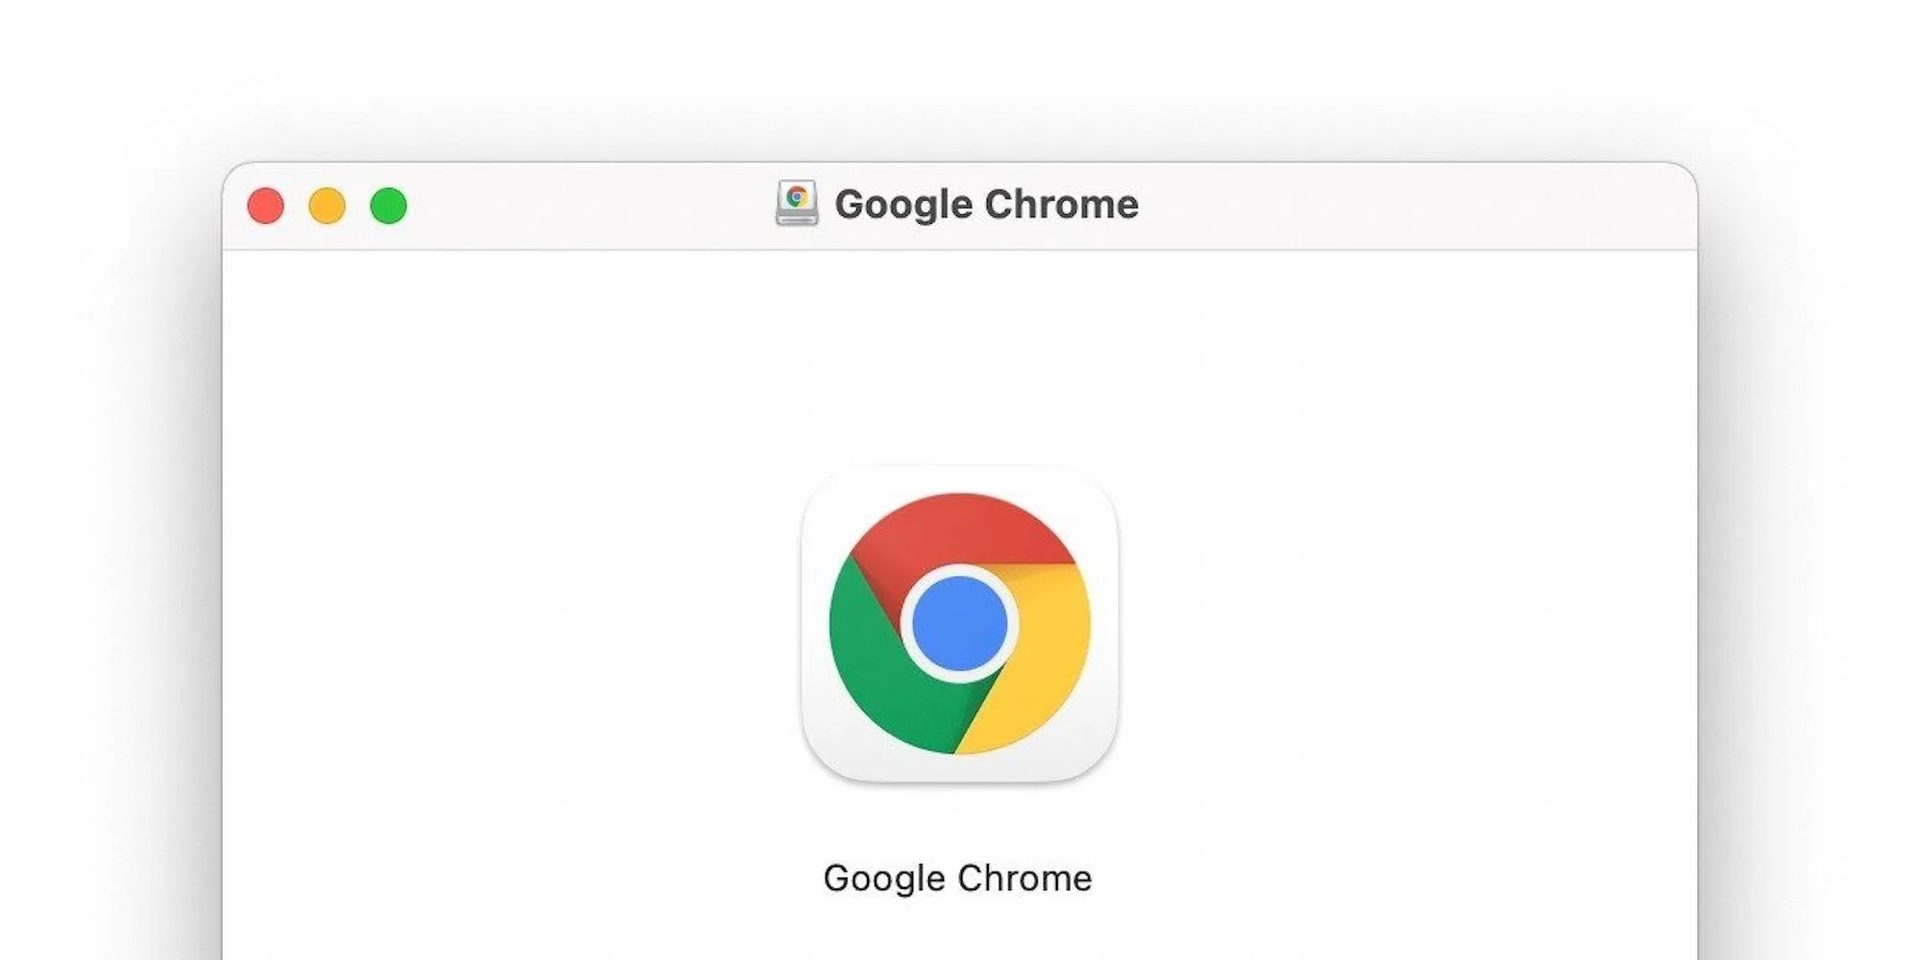 Chrome on macOS is 20 percent faster now and the fastest browser on Mac